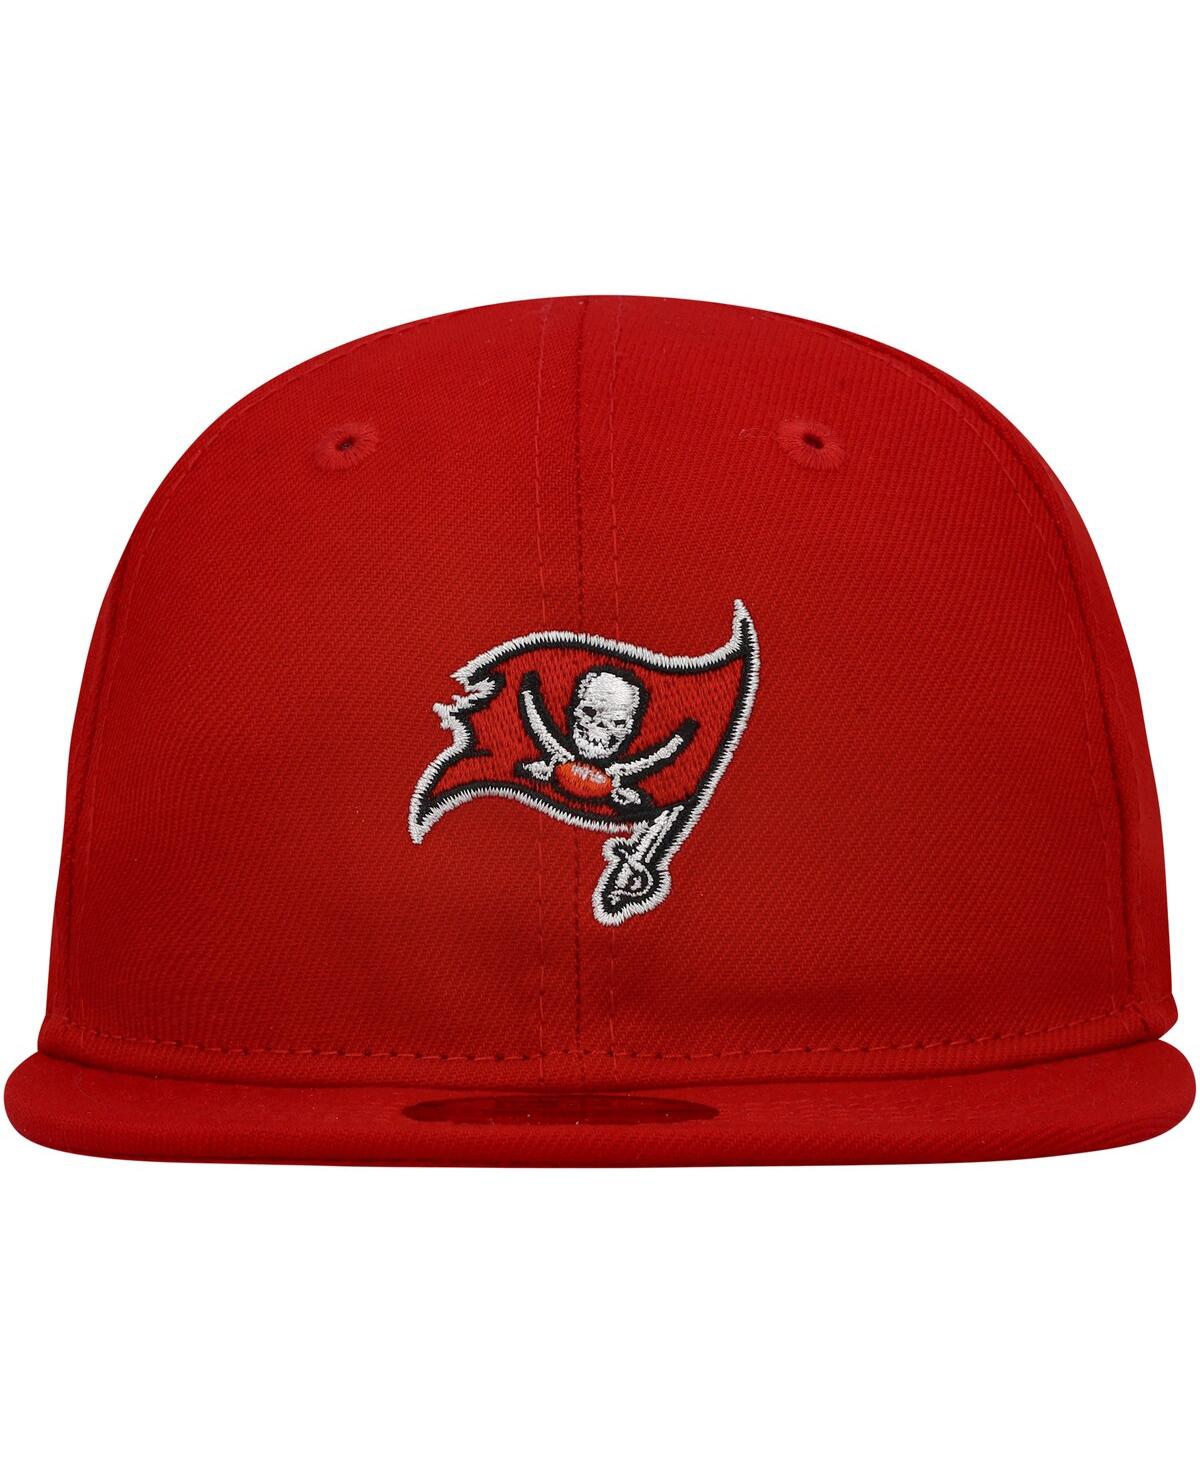 Shop New Era Infant Boys And Girls  Red Tampa Bay Buccaneers My 1st 9fifty Snapback Hat